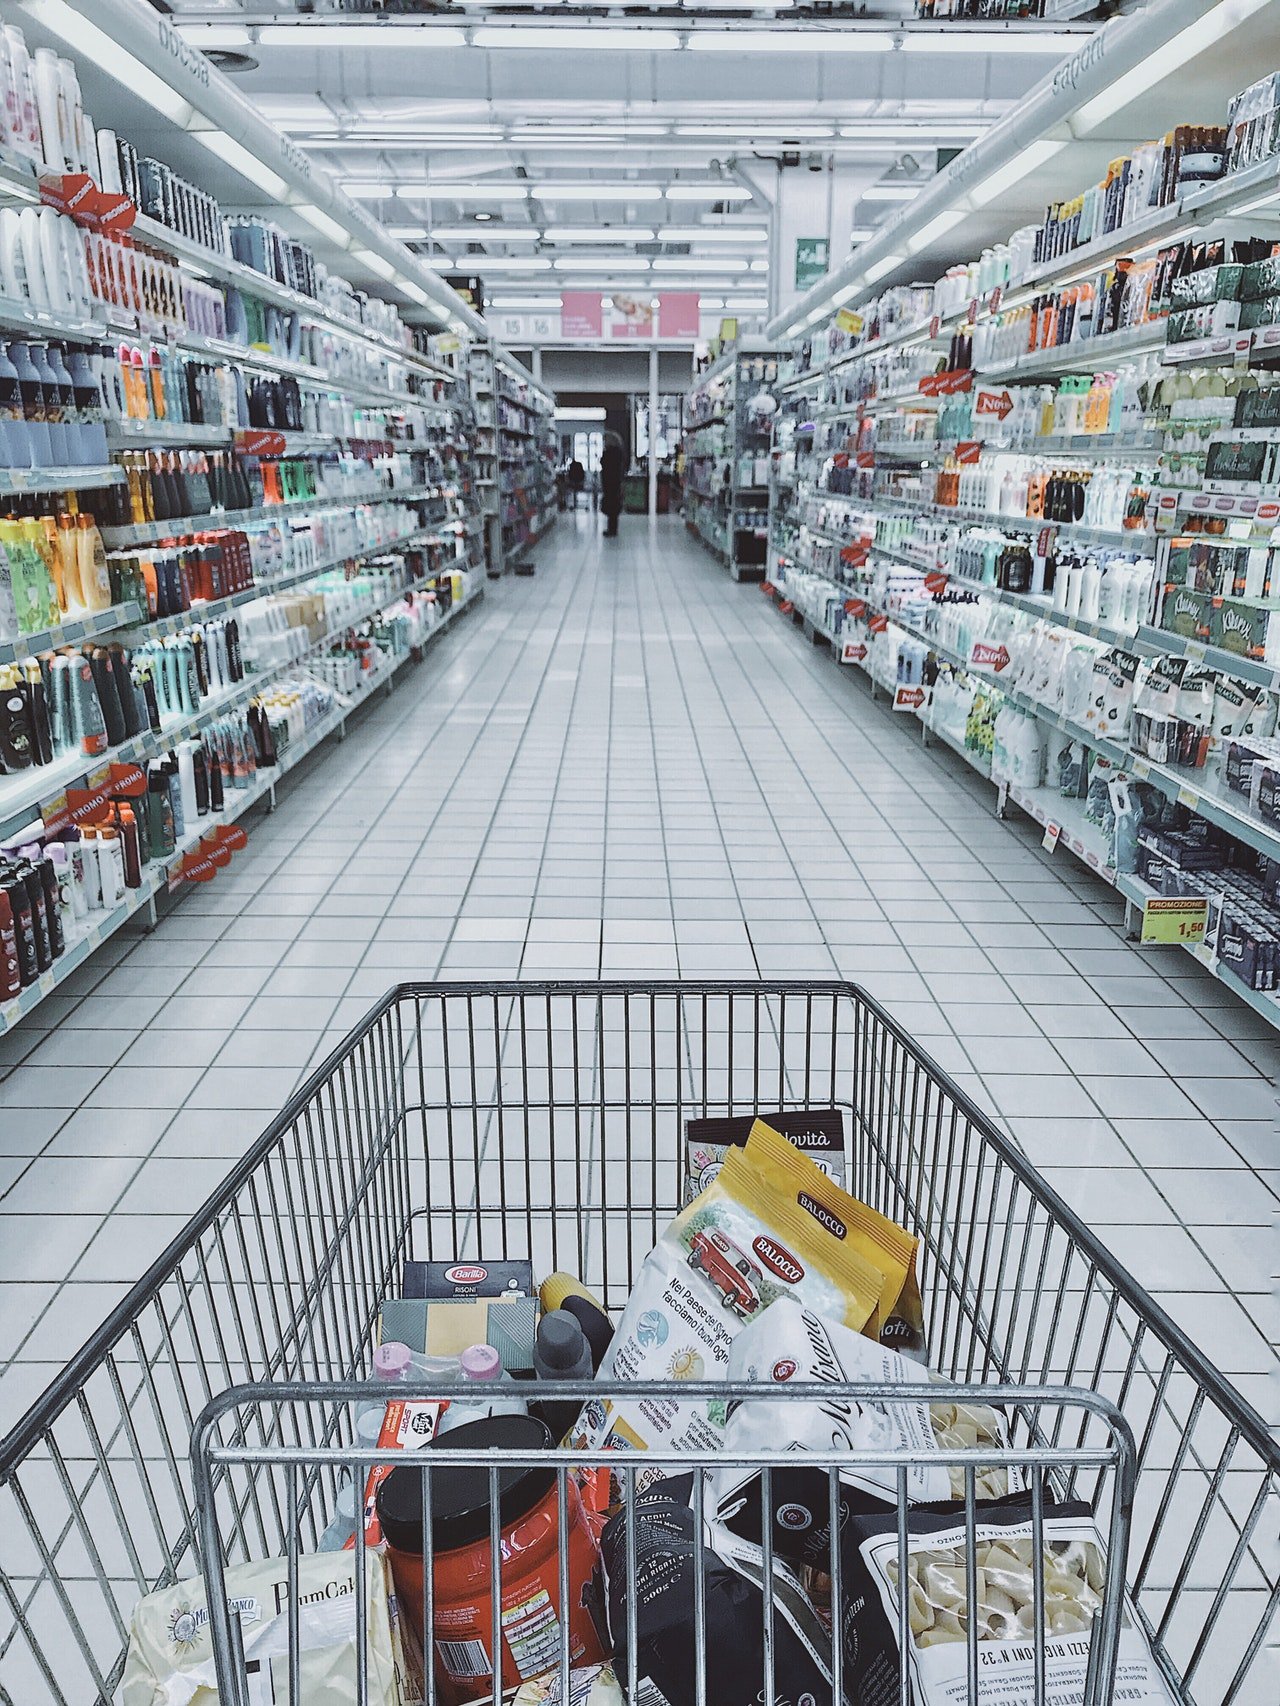 Shopping cart with grocery items in a supermarket | Source: Pexels